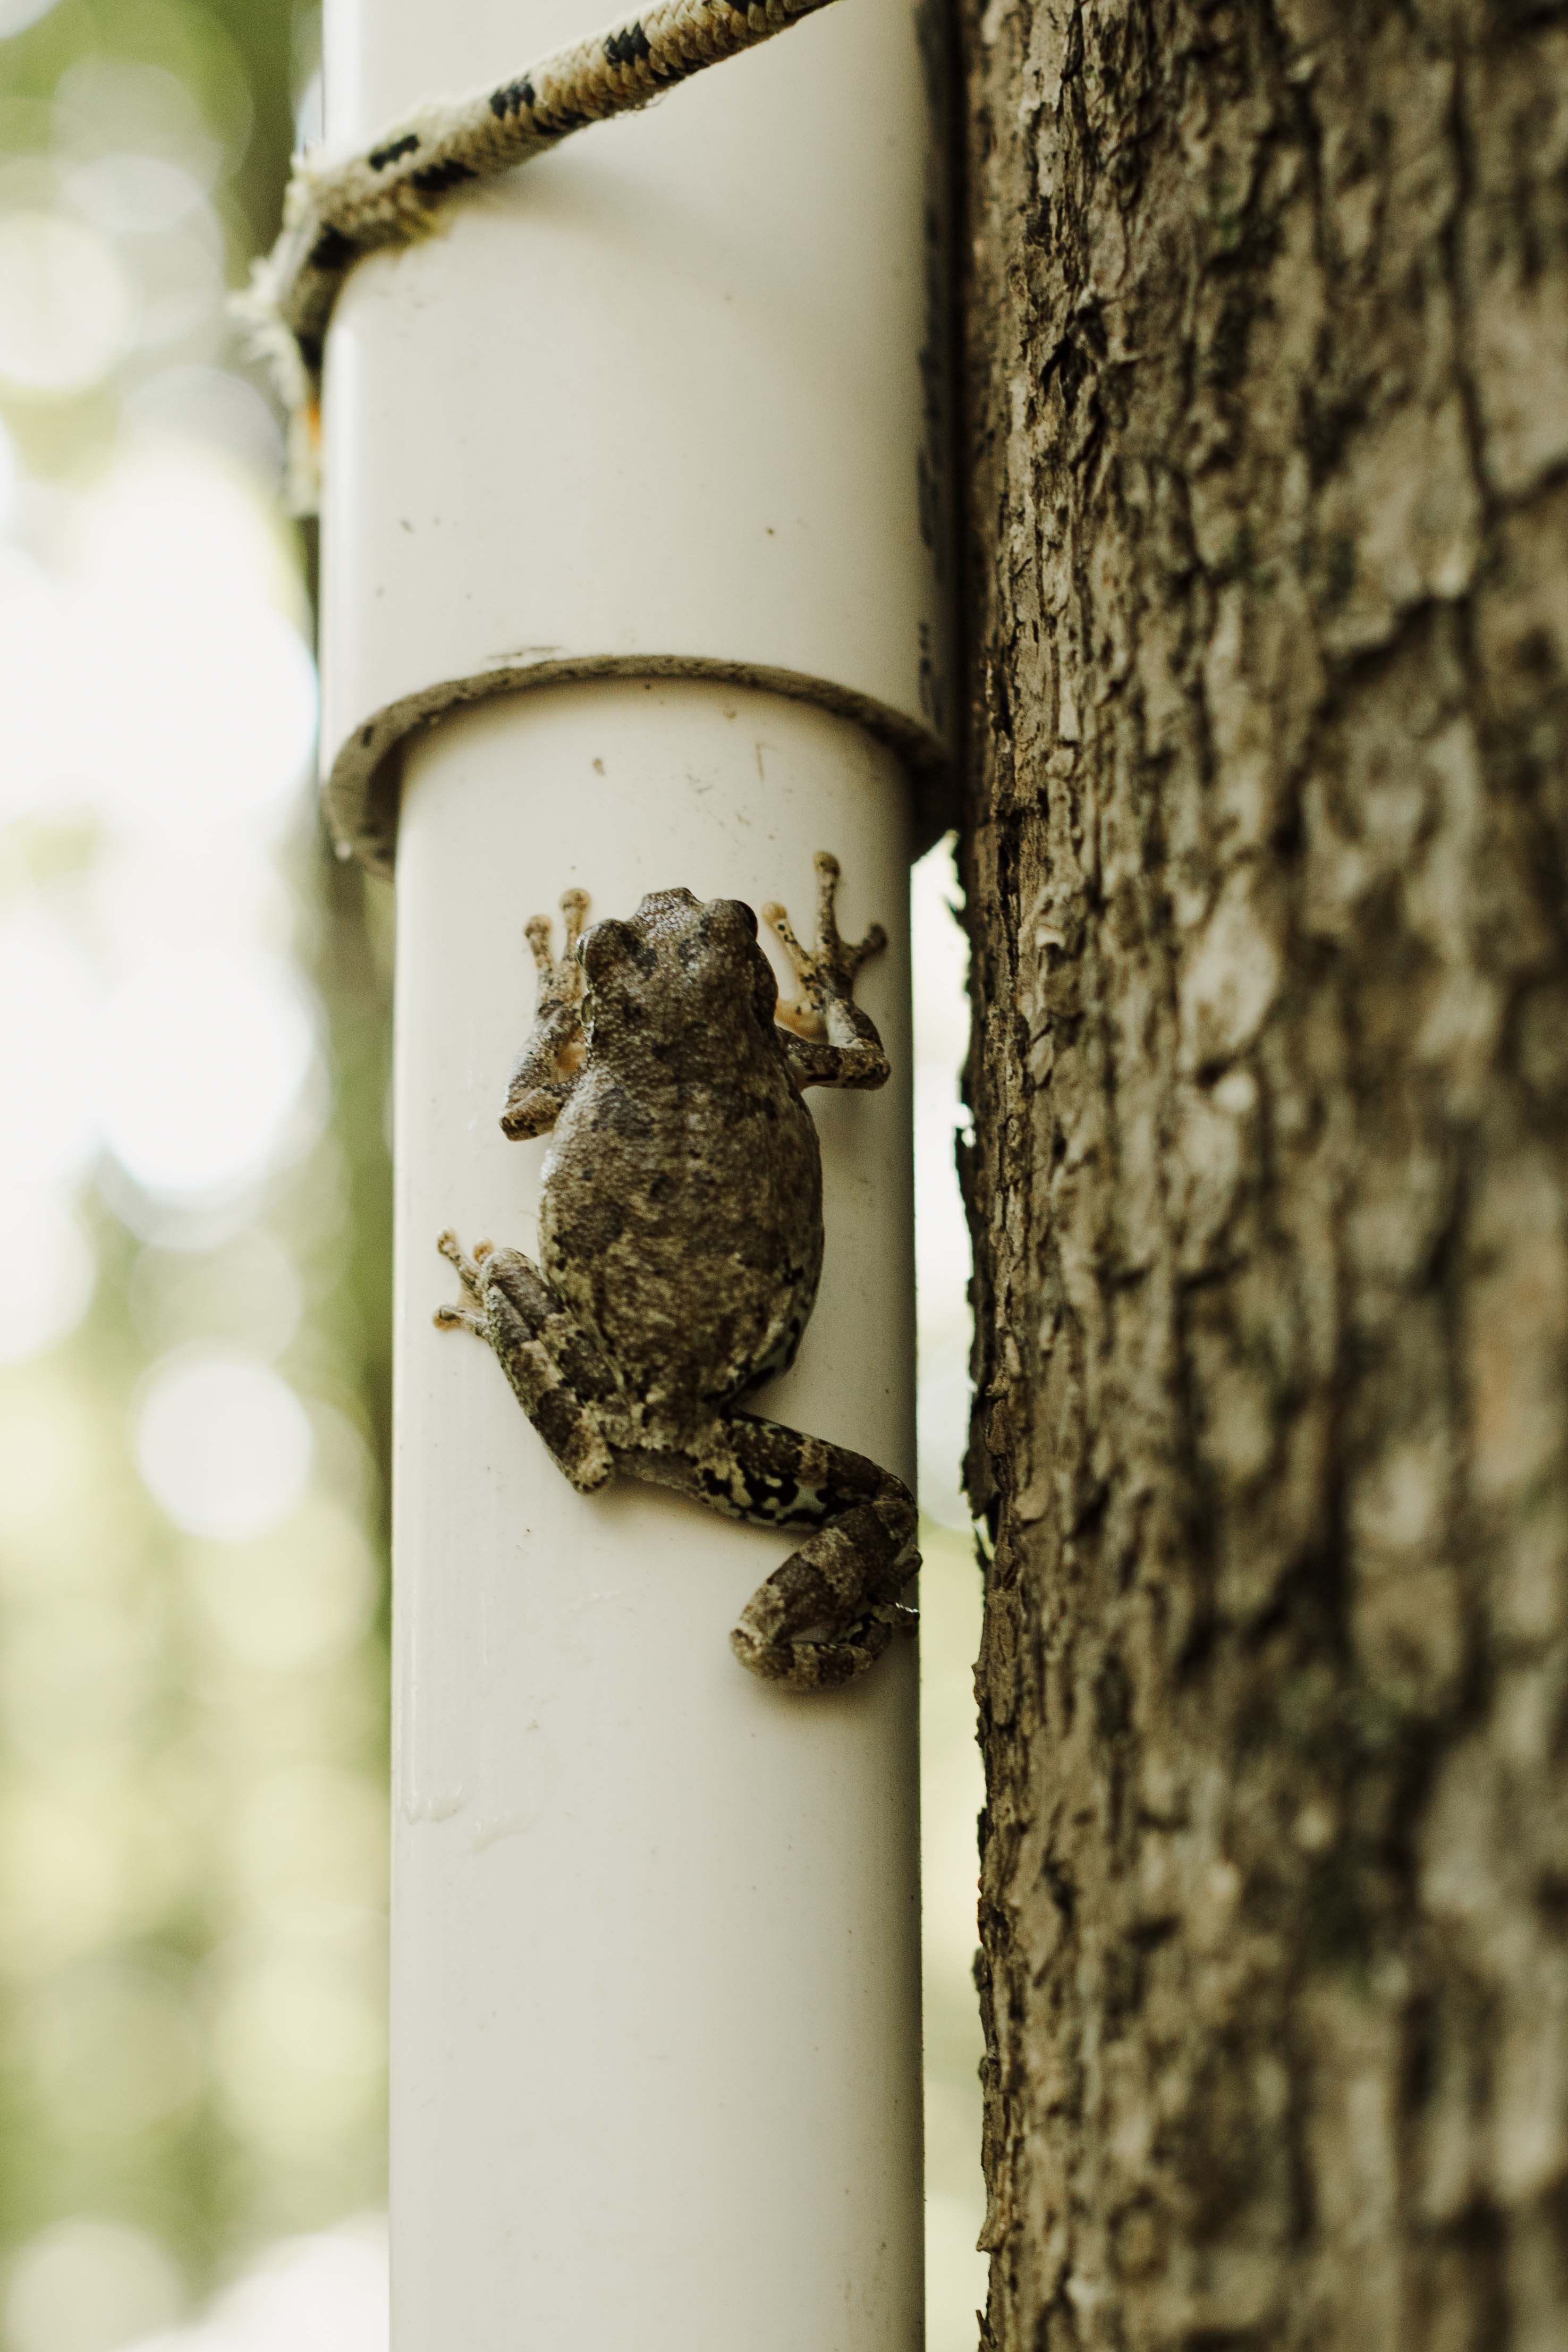 Learn about NGRREC’s efforts to study and save the bird-voiced treefrog at the premier of “The Call of the Swamp: Investigating the State-threatened Bird-voiced Treefrog.